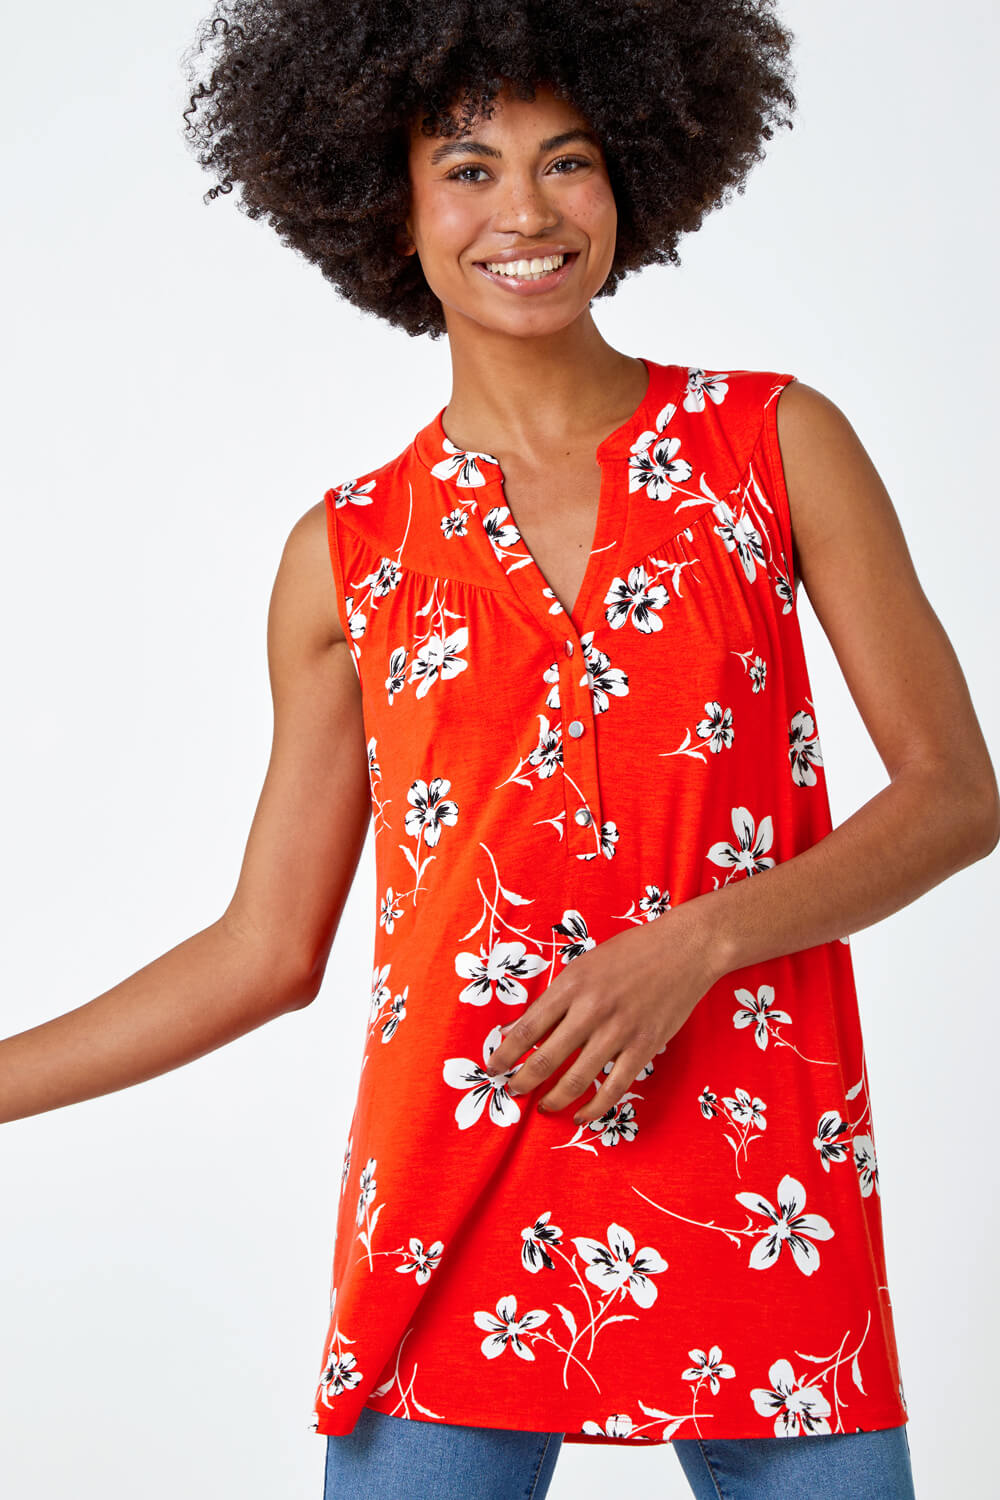 Red Sleeveless Floral Print Top, Image 4 of 5